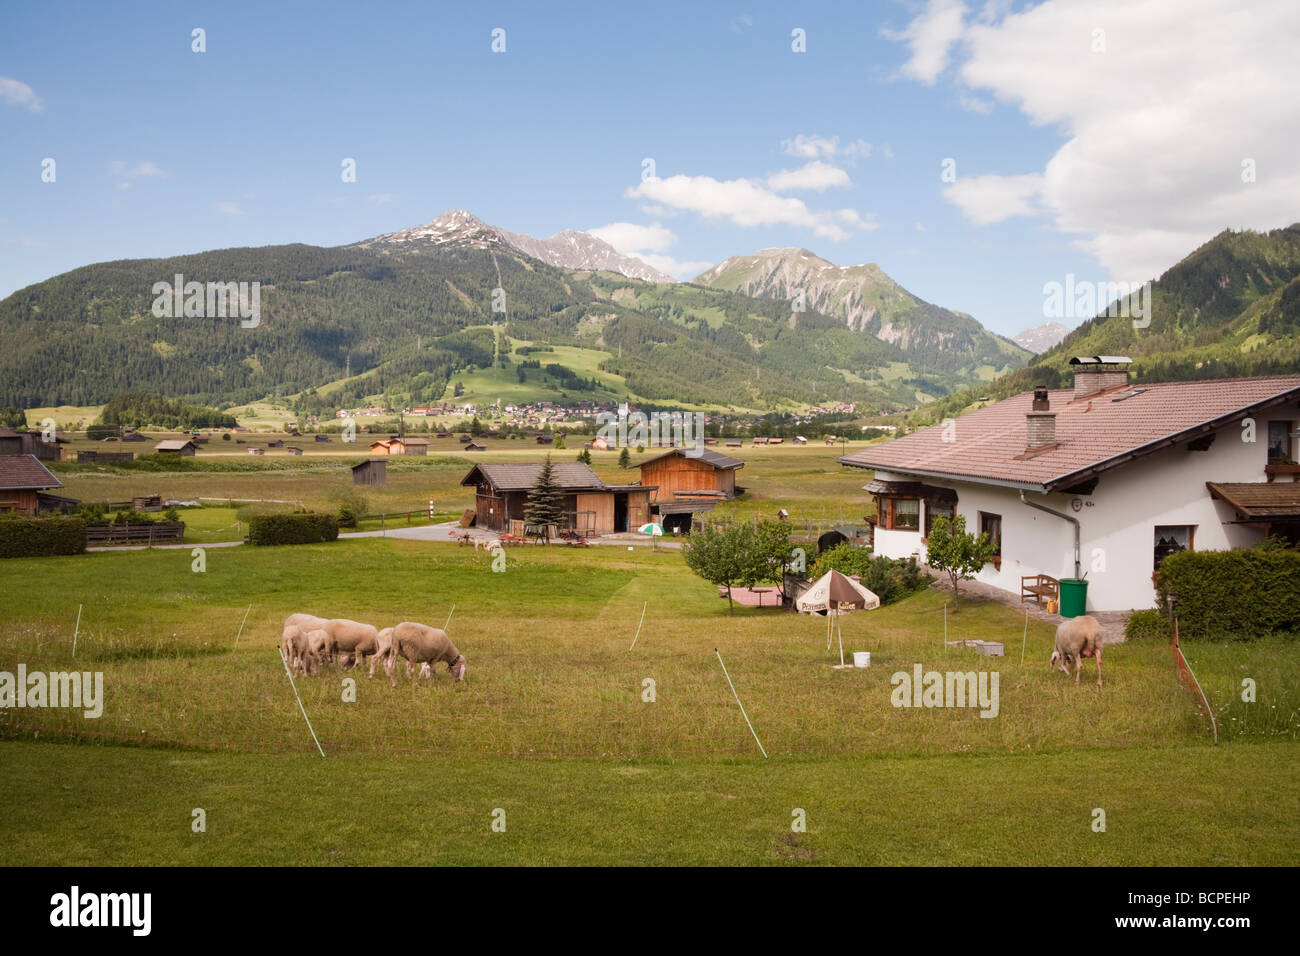 Ehrwald Tyrol Austria Europe Sheep chalets and wooden barns in Alpine valley with view to Lermoos village in summer Stock Photo